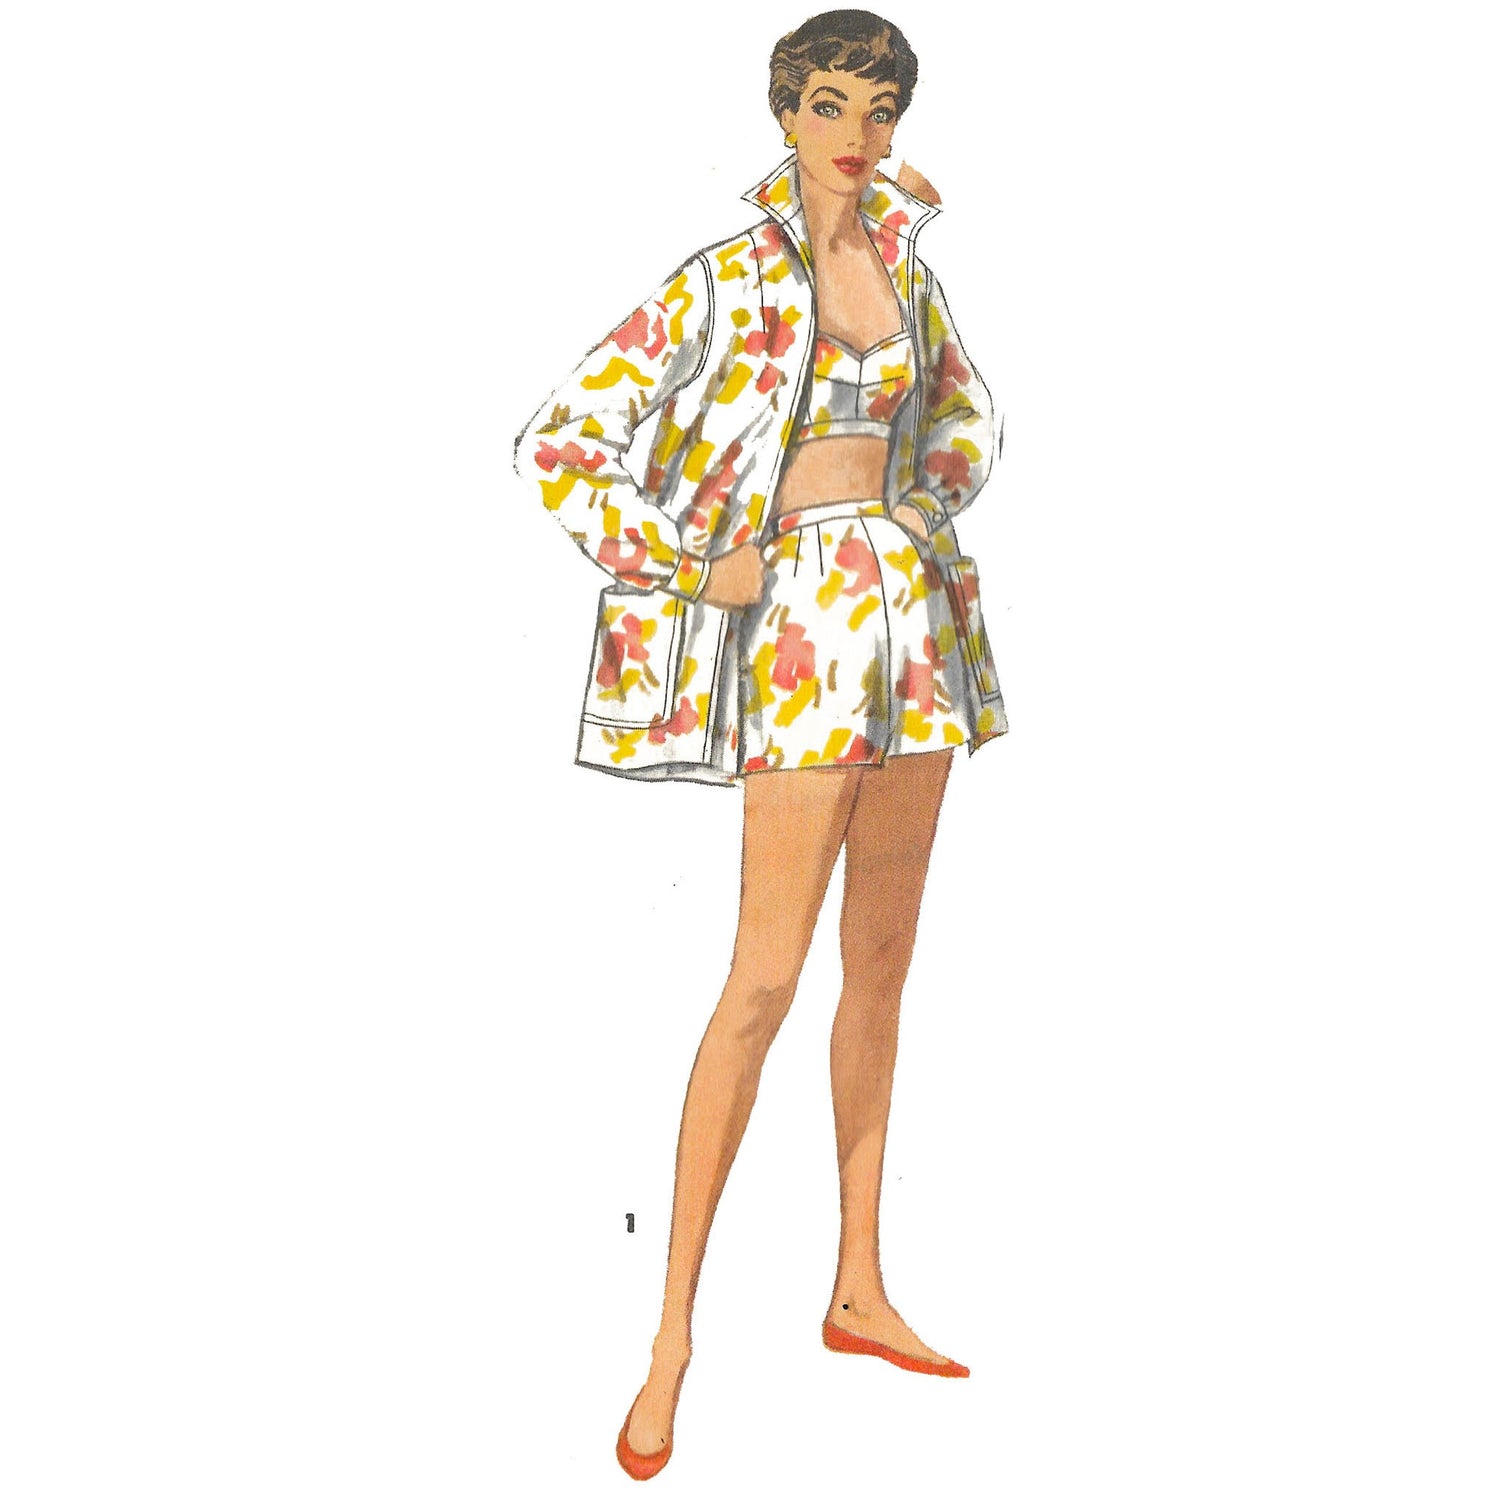 Model wearing 1950s three-piece playsuit made from Simplicity 1659 pattern